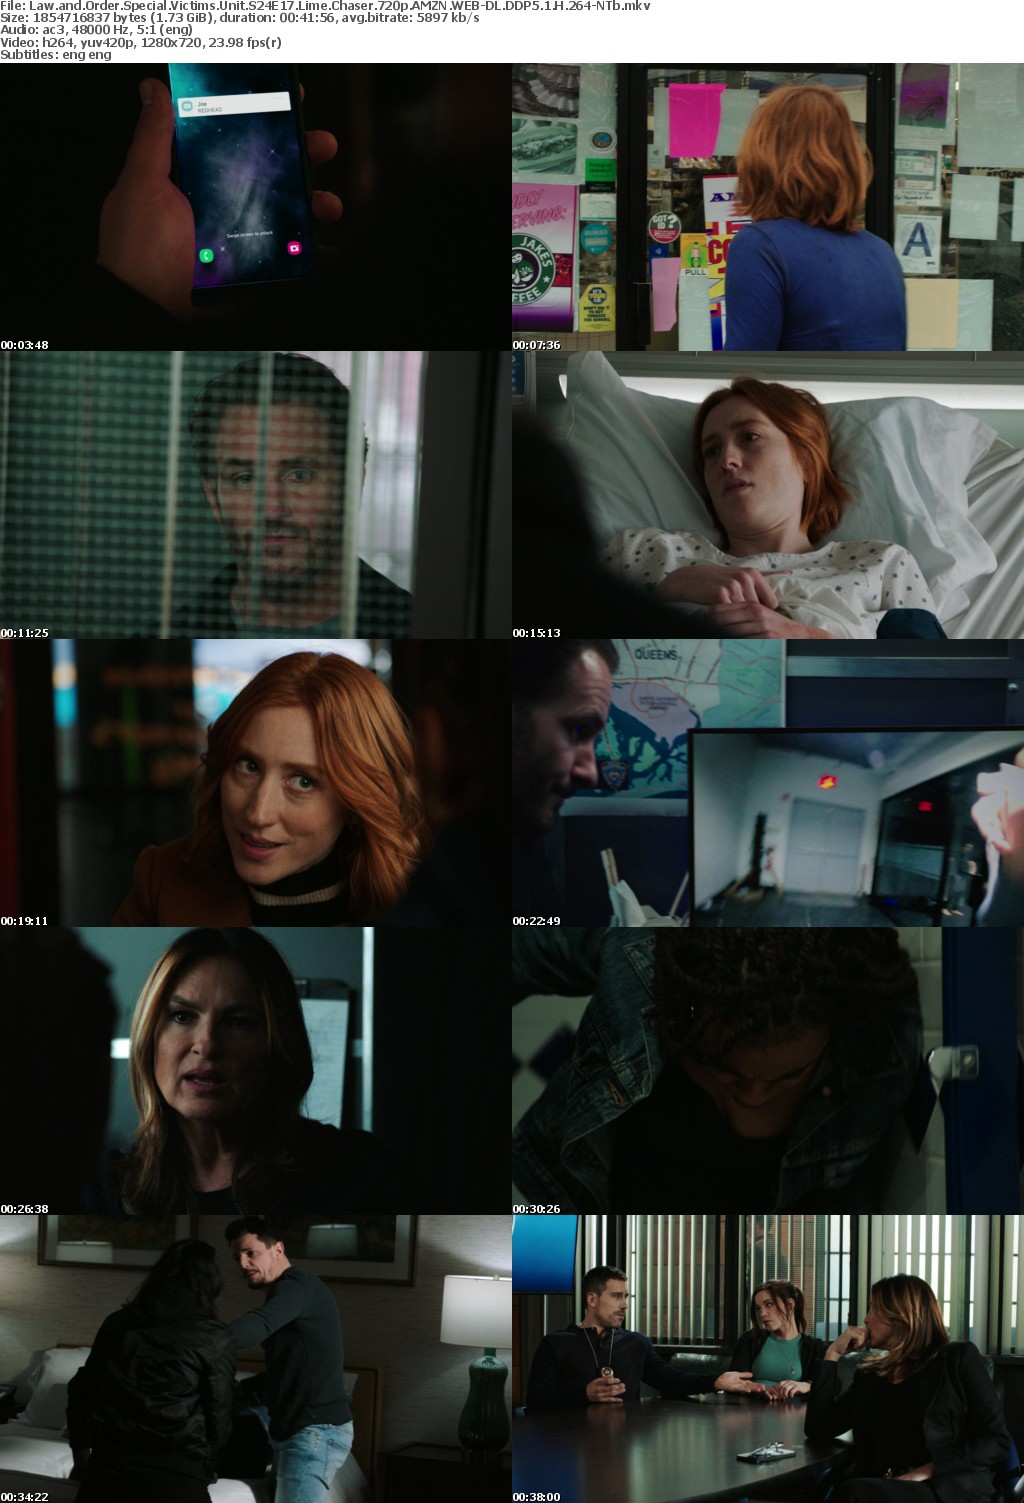 Law and Order SVU S24E17 Lime Chaser 720p AMZN WEBRip DDP5 1 x264-NTb